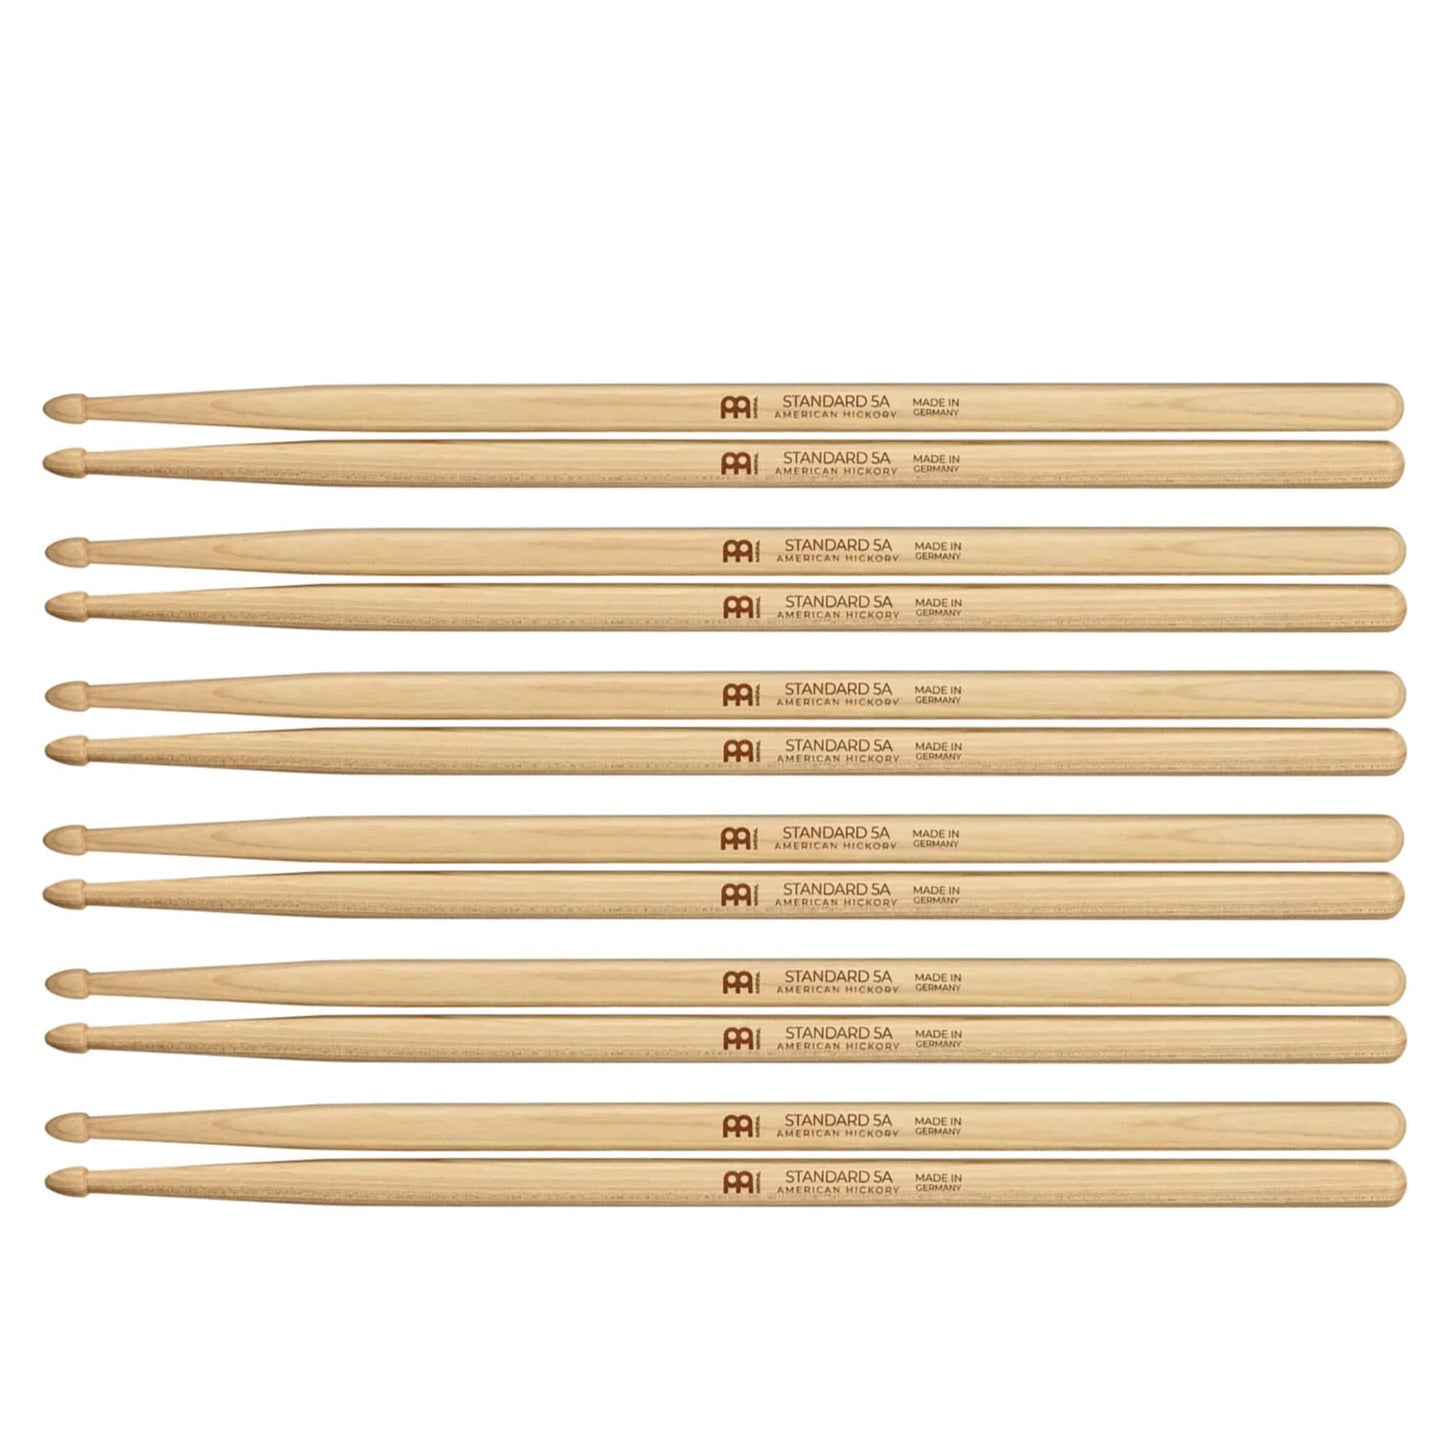 Meinl Standard 5A Wood Tip Drum Sticks (6 Pair Bundle) Drums and Percussion / Parts and Accessories / Drum Sticks and Mallets